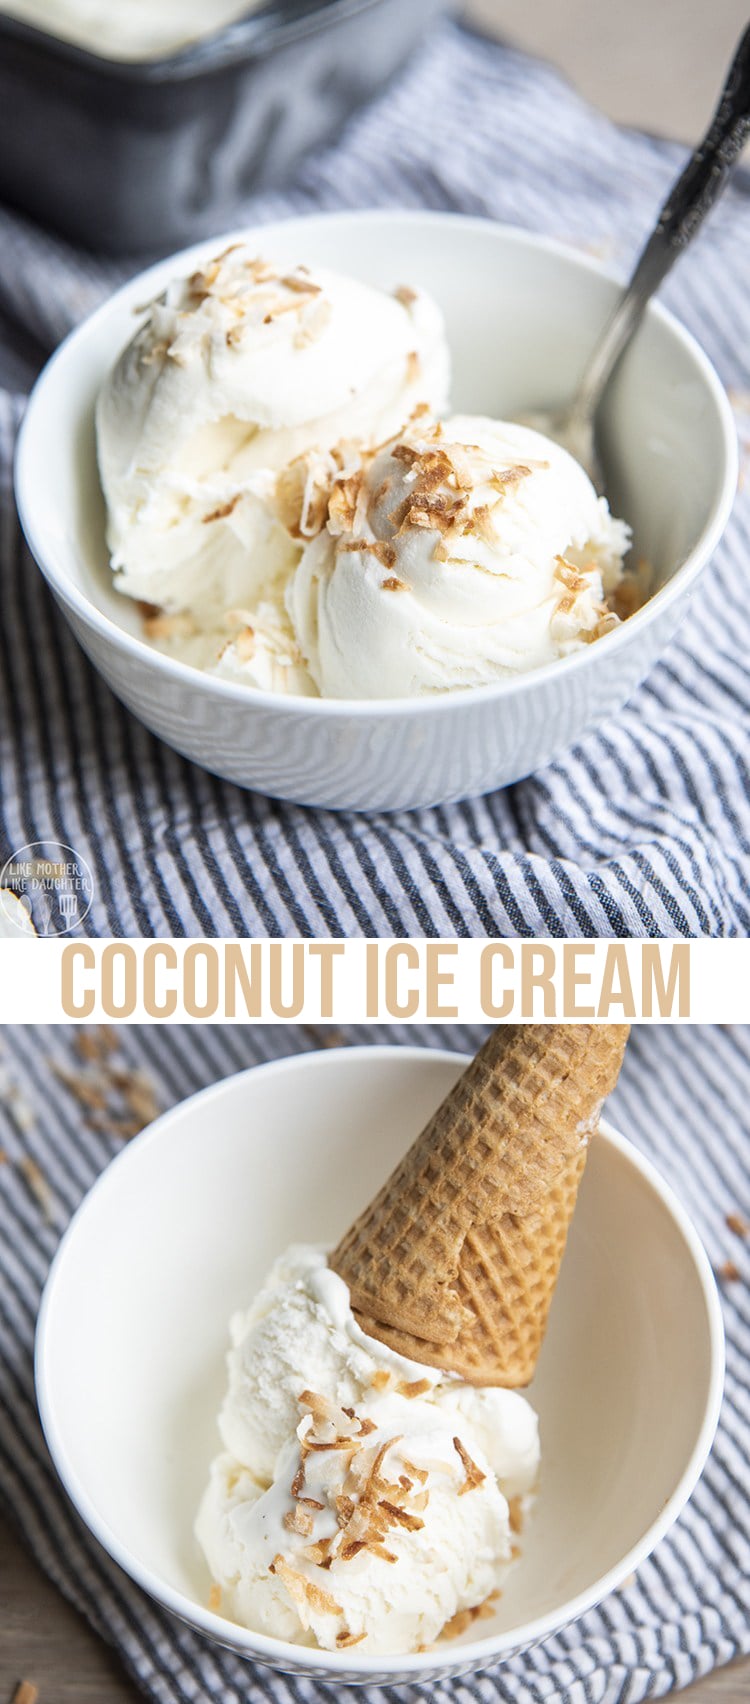 This coconut ice cream is so creamy, refreshing, sweet and delicious! It's only 4 ingredients, and has the perfect rich coconut flavor!